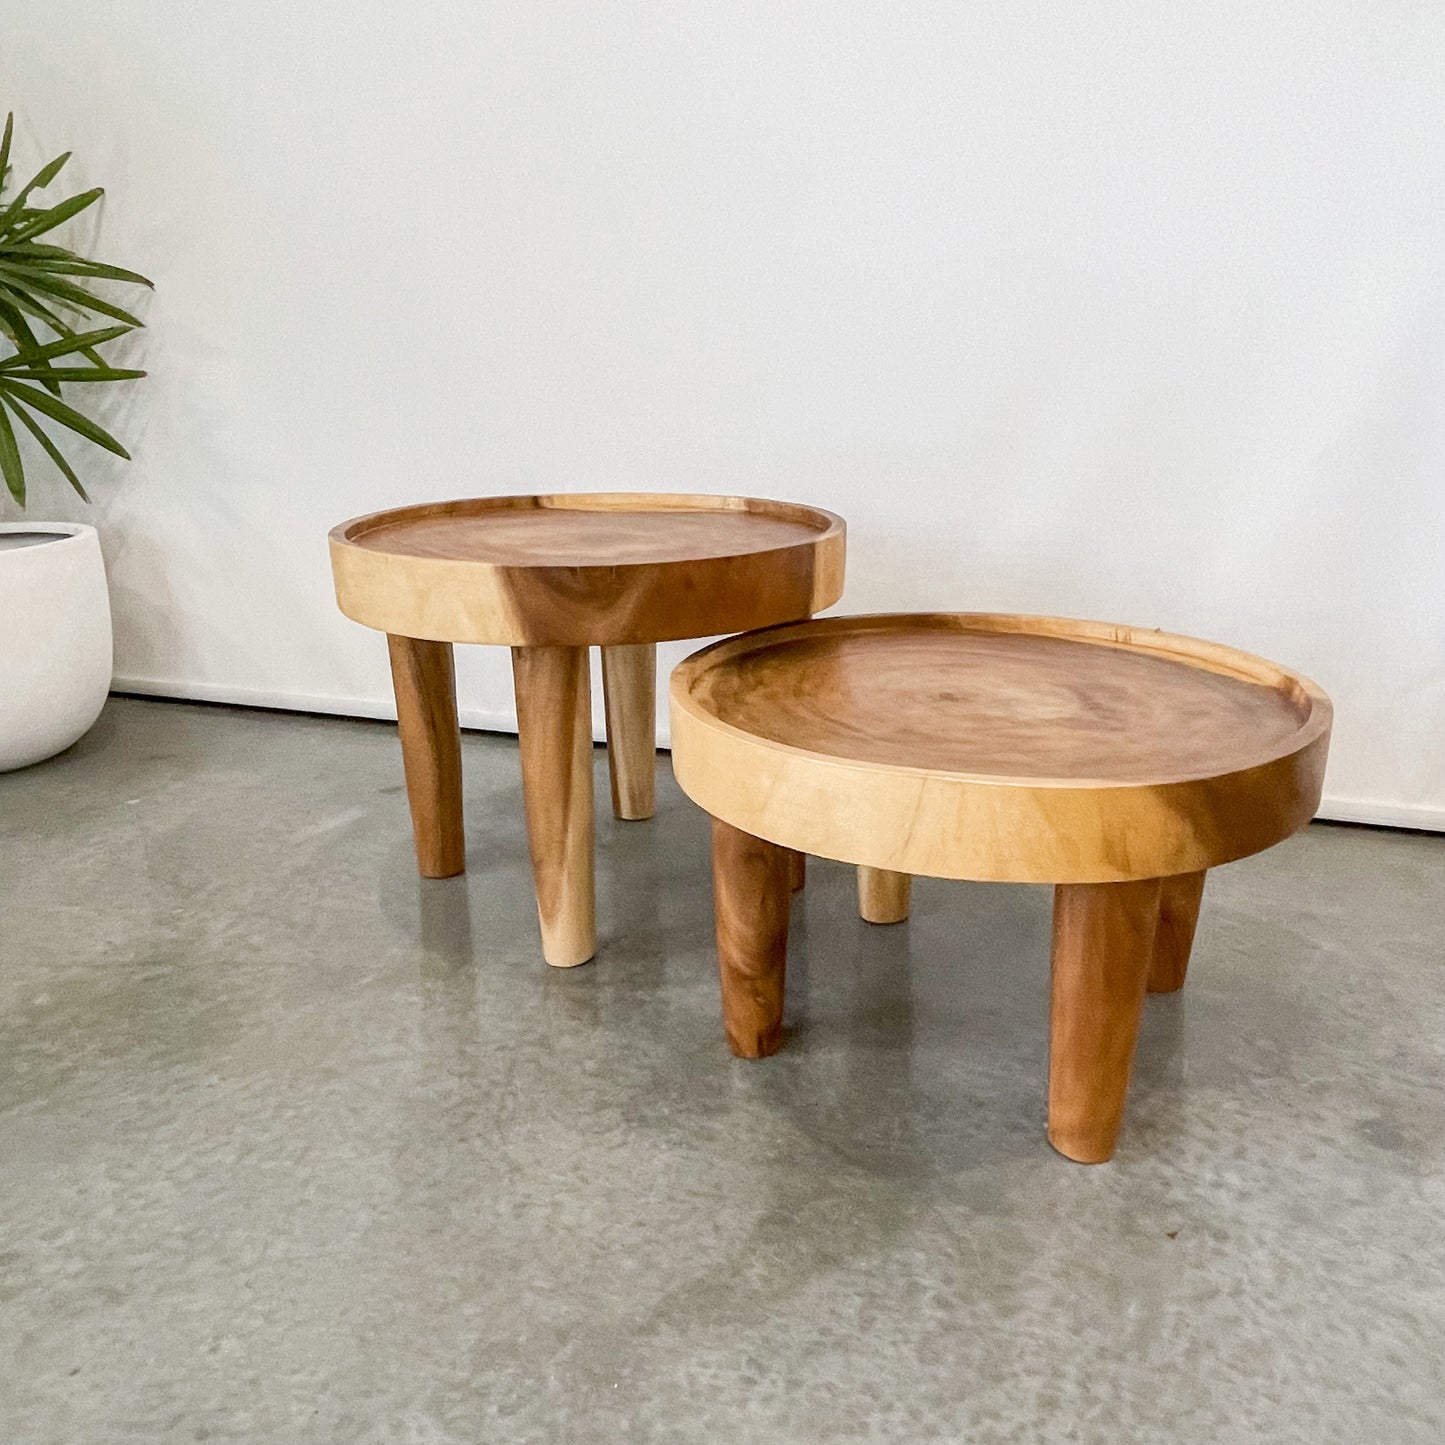 The Lago Timber Coffee Table